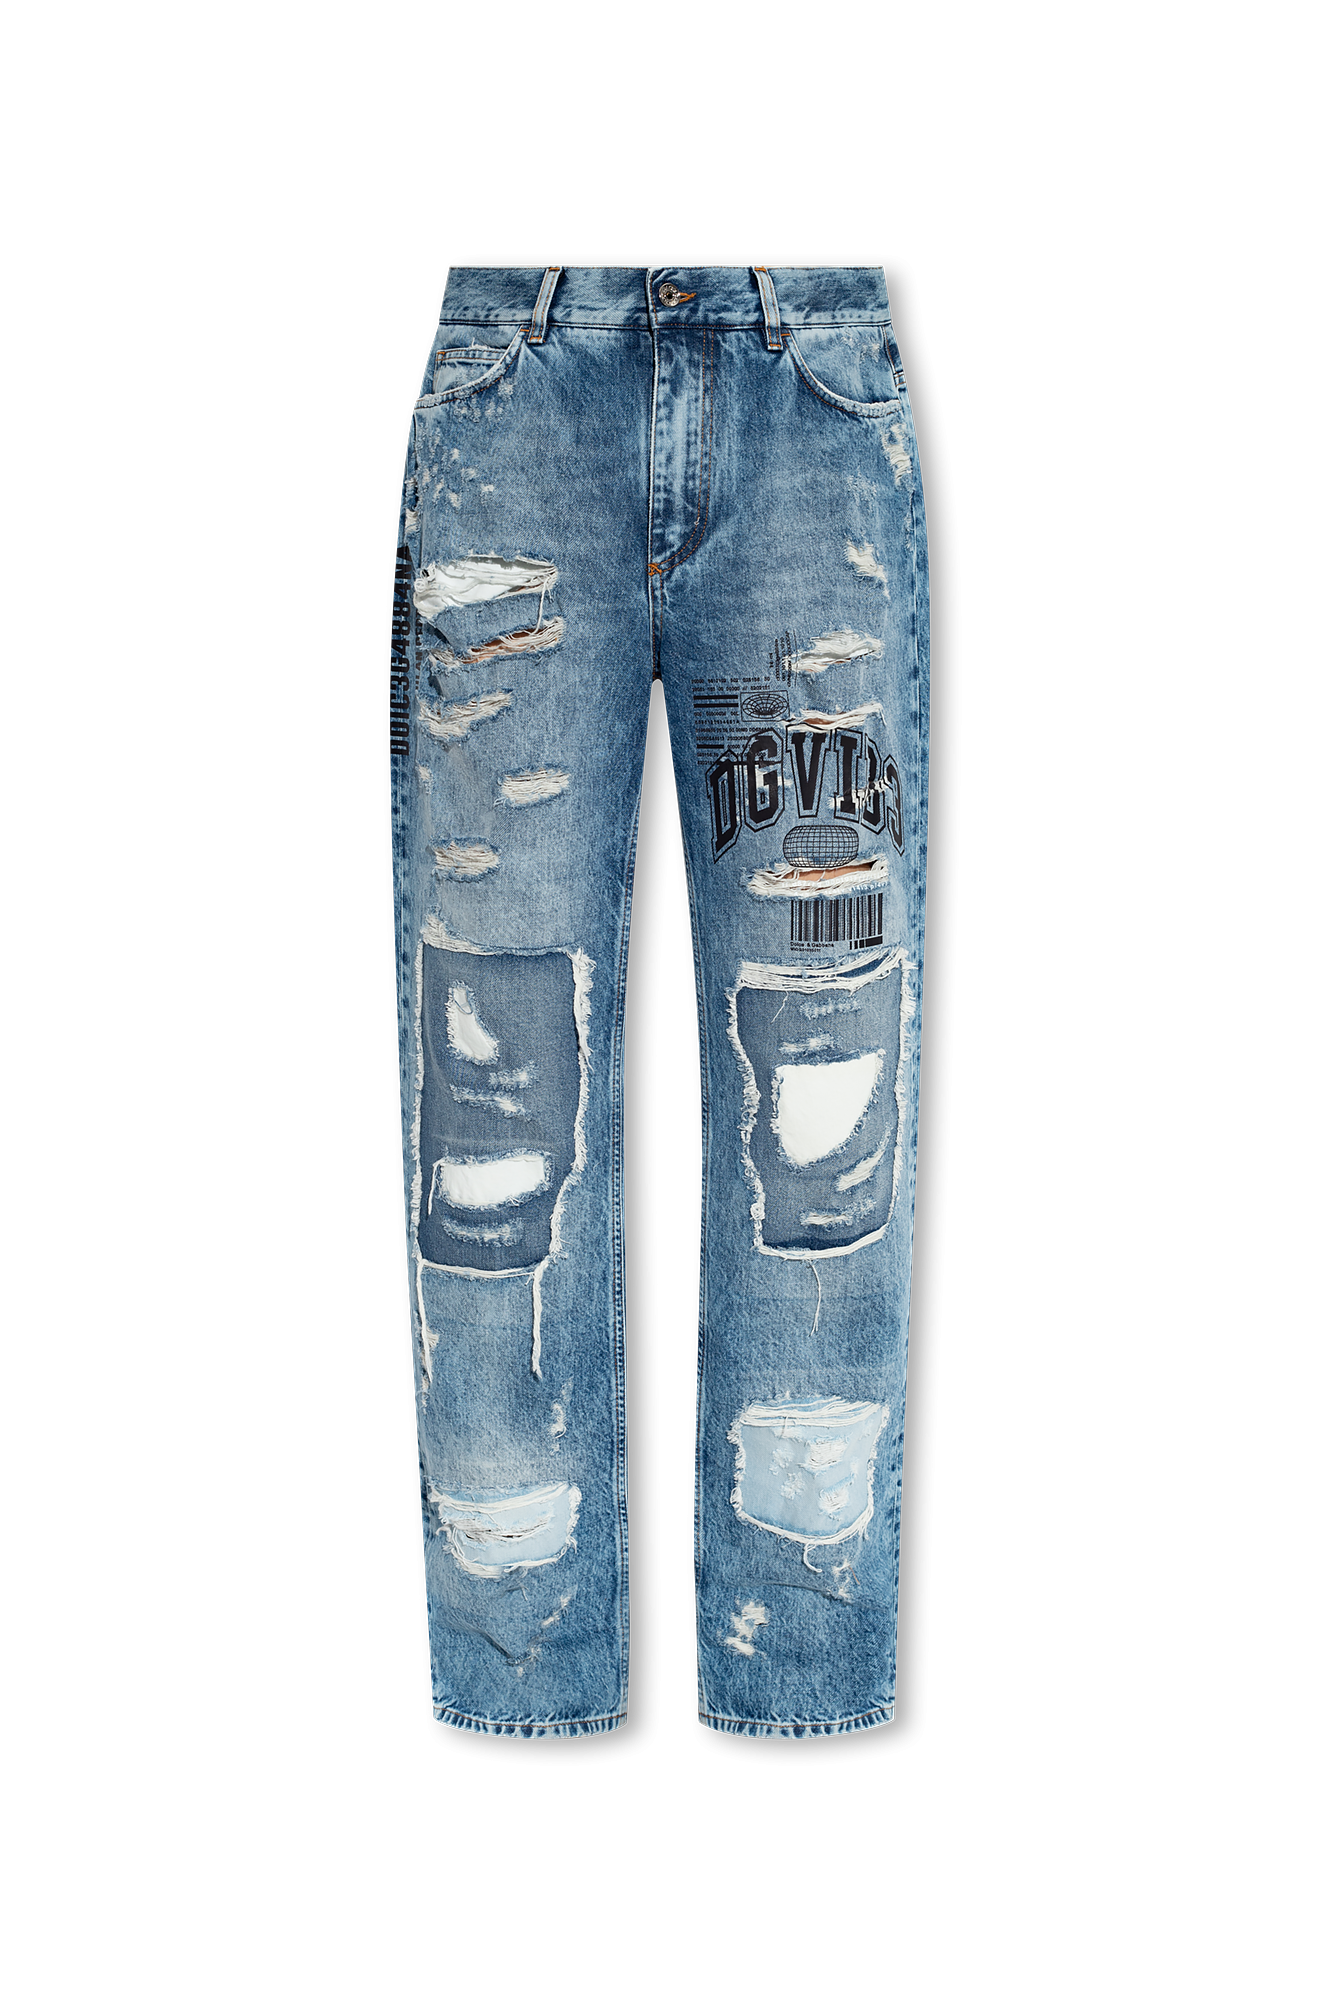 Dolce & Gabbana Jeans with vintage effect